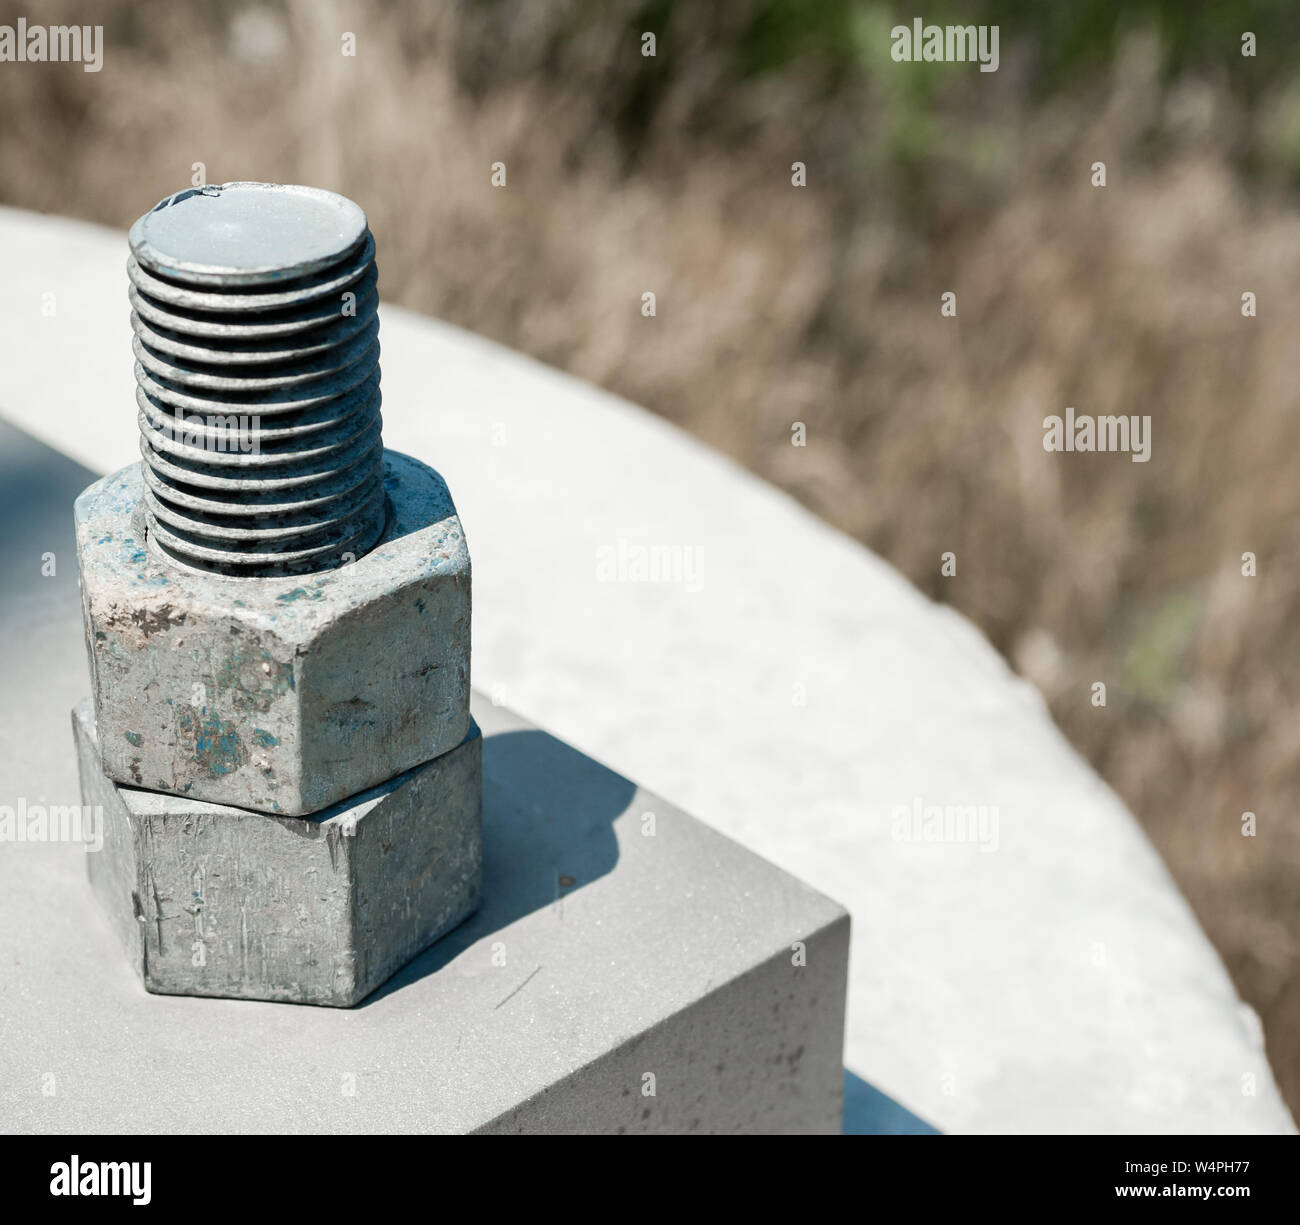 Two hexagonal steel nuts threaded on bolt attached to concrete block. Stock Photo